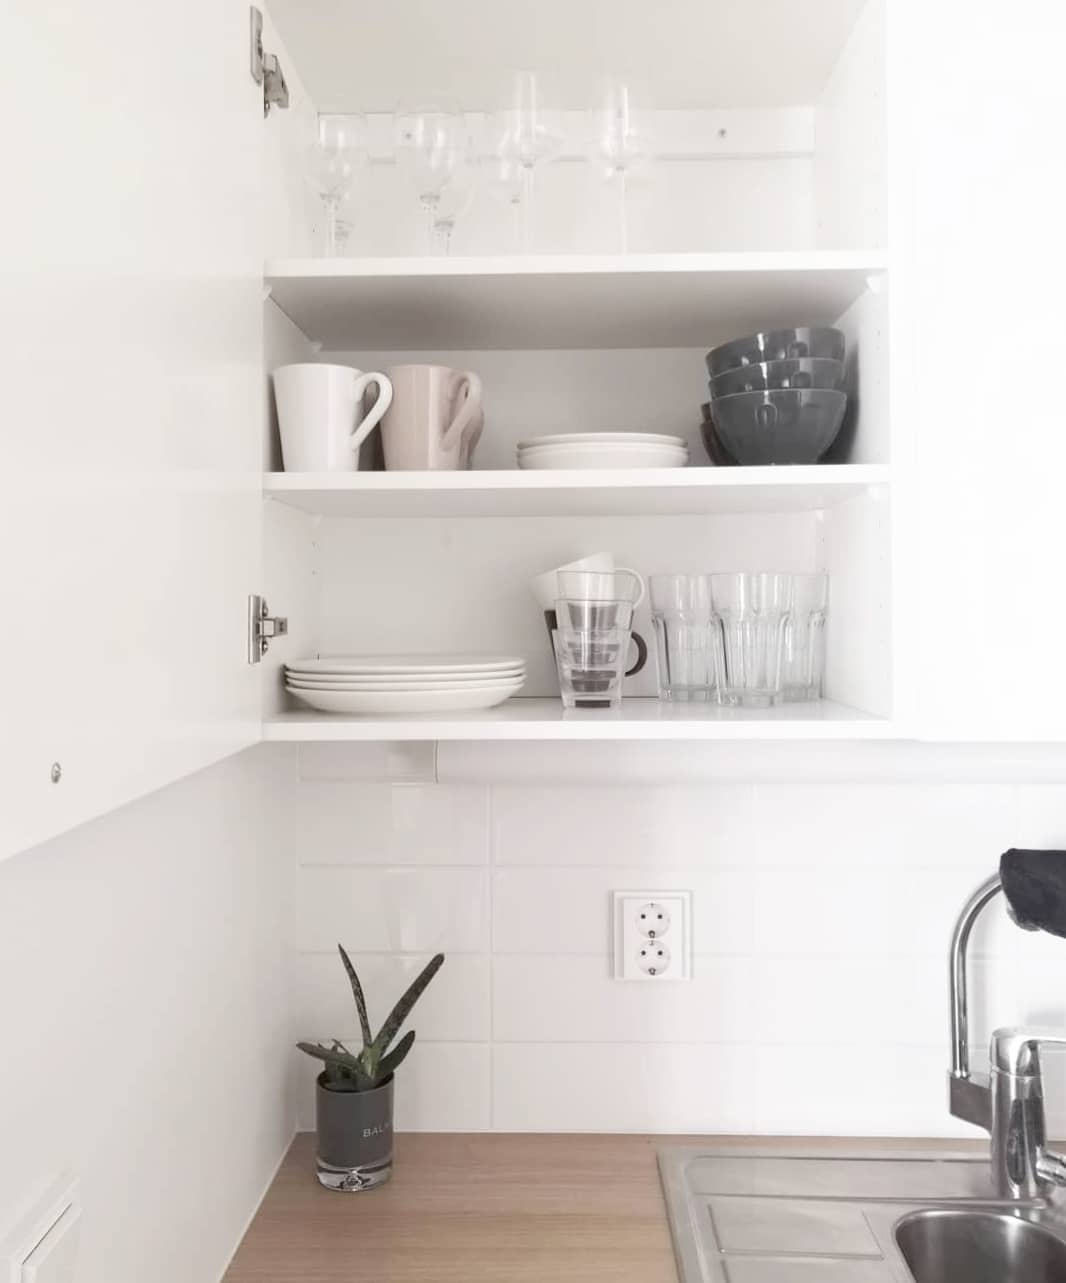 design a minimalist kitchen with these 15 ideas | extra space storage